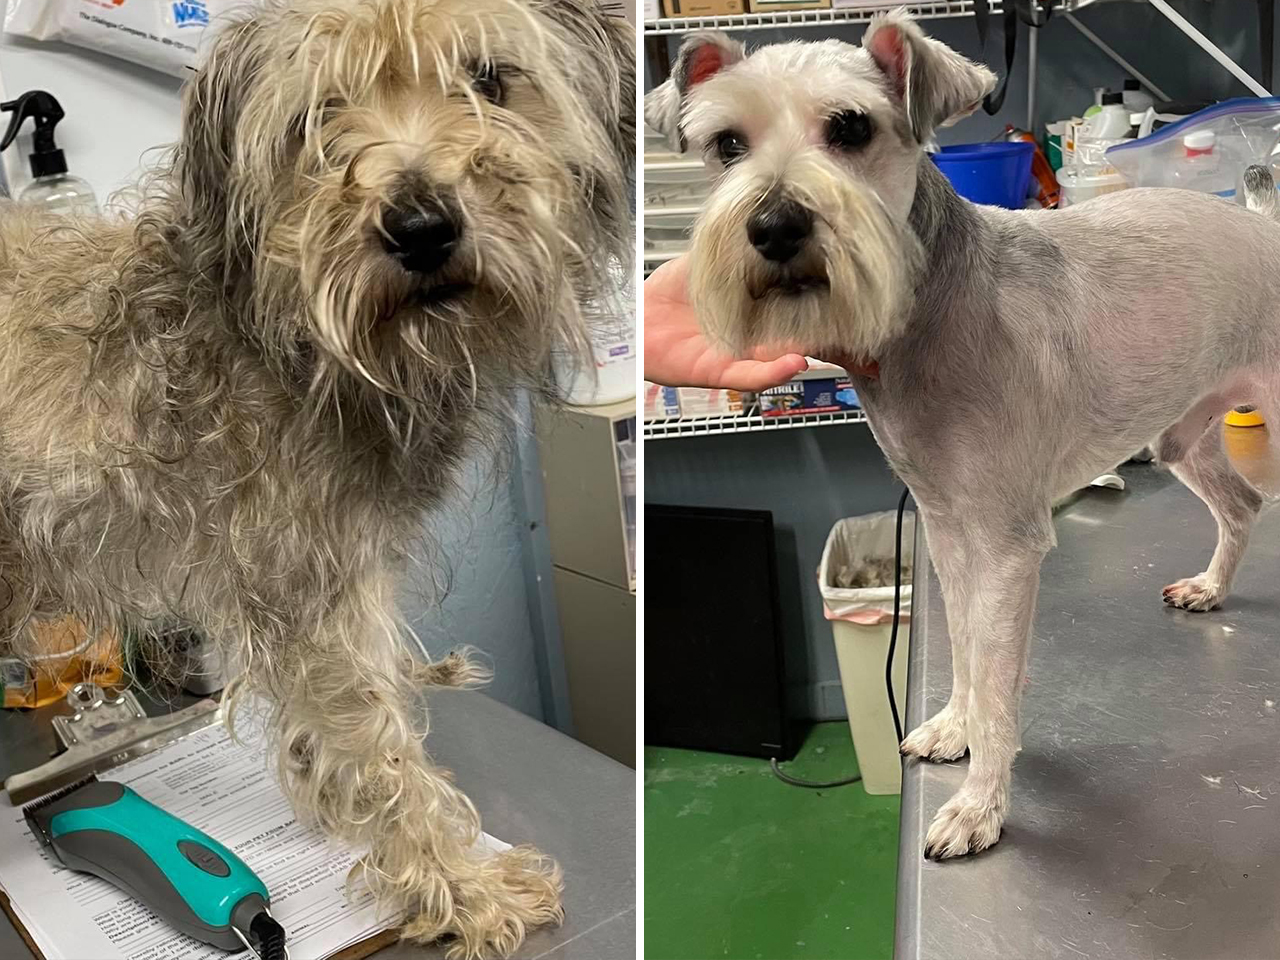 Bentley was rescued after he was seen hanging out by a bridge. A grooming transformed him into a handsome gentleman and Bentley was soon adopted. His new hangout is a comfy couch.